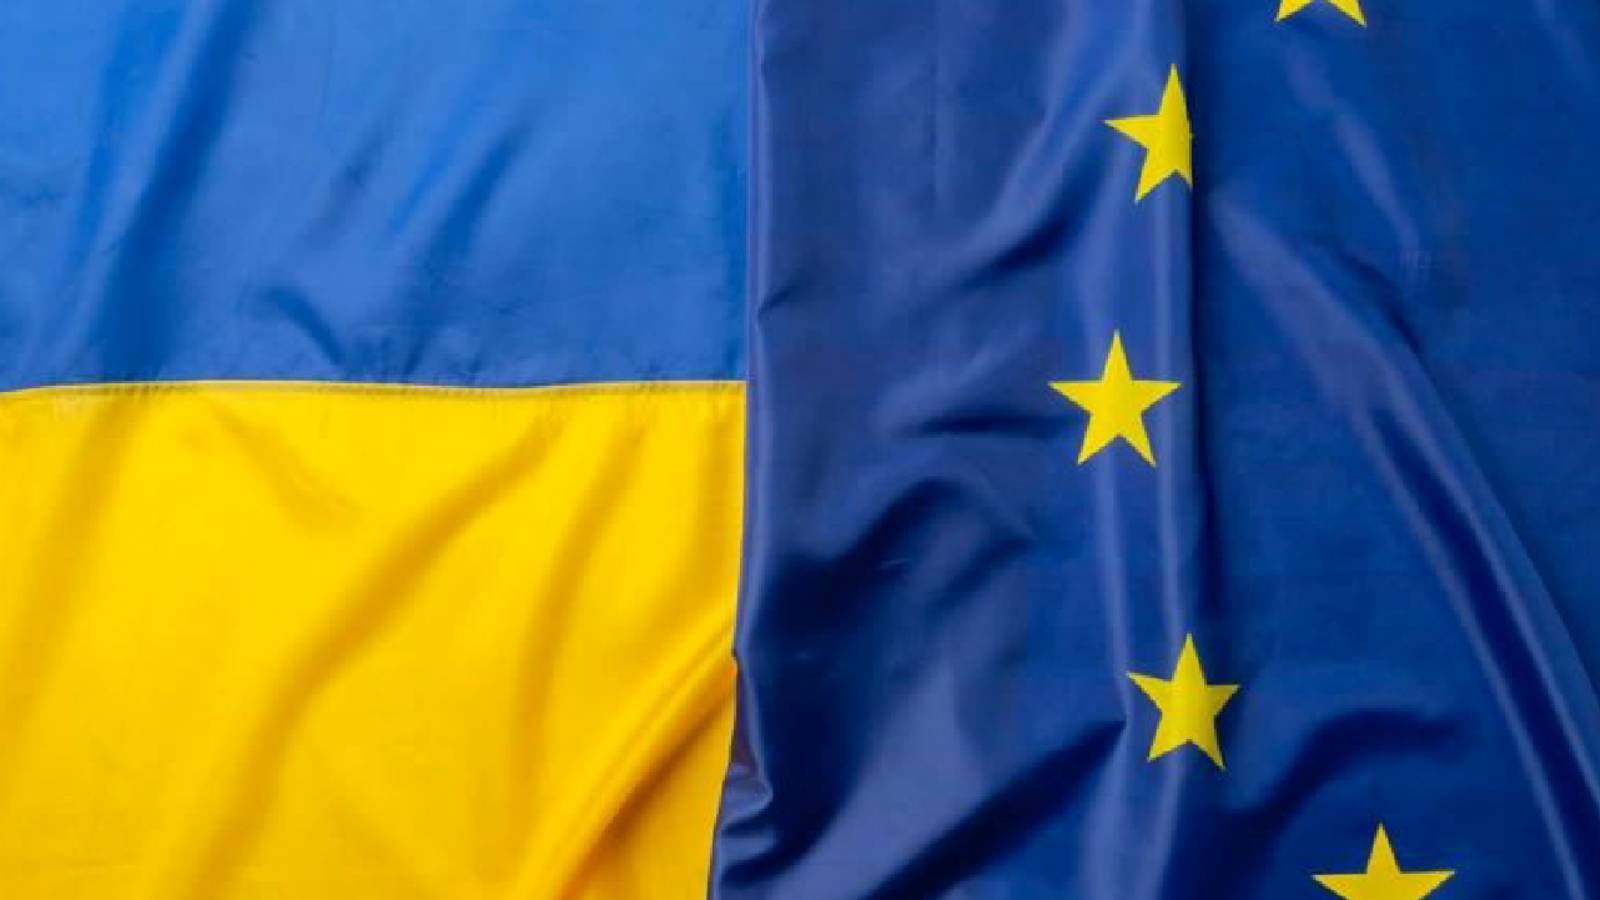 Ukraine Submitted Questionnaire Evaluation of Candidacy European Union Accession